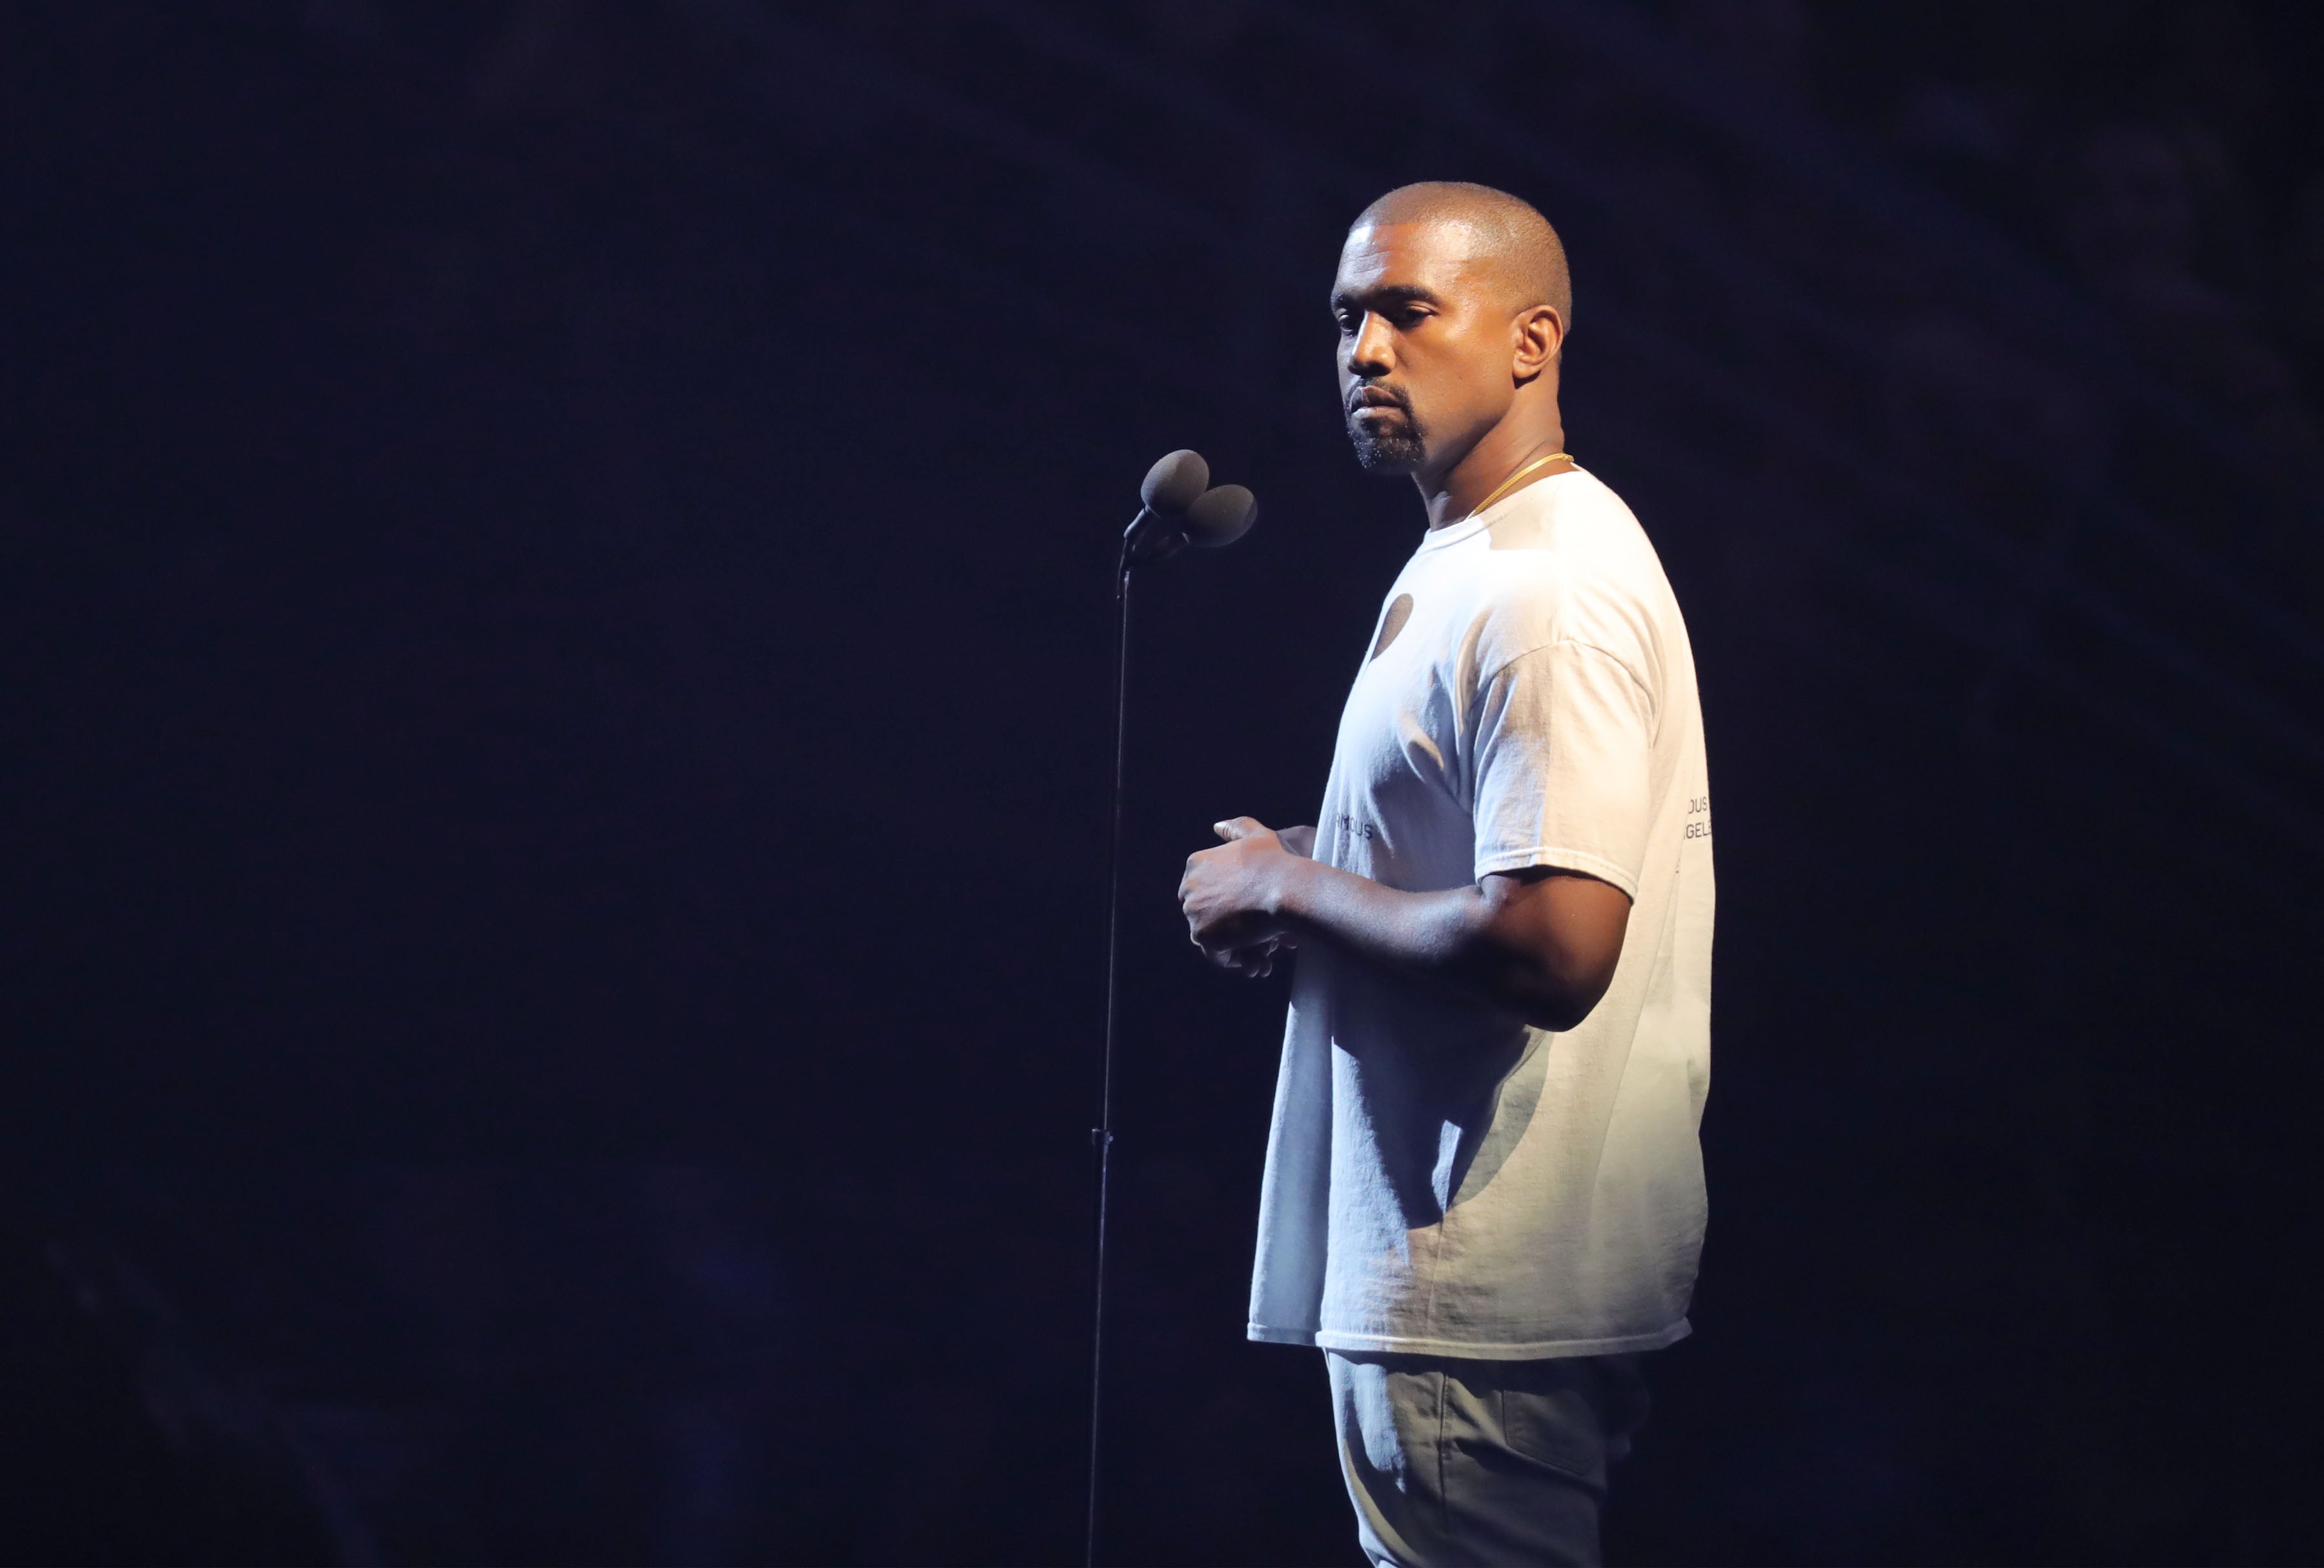 Kanye West To Remain Hospitalized, Release Date Not Set
